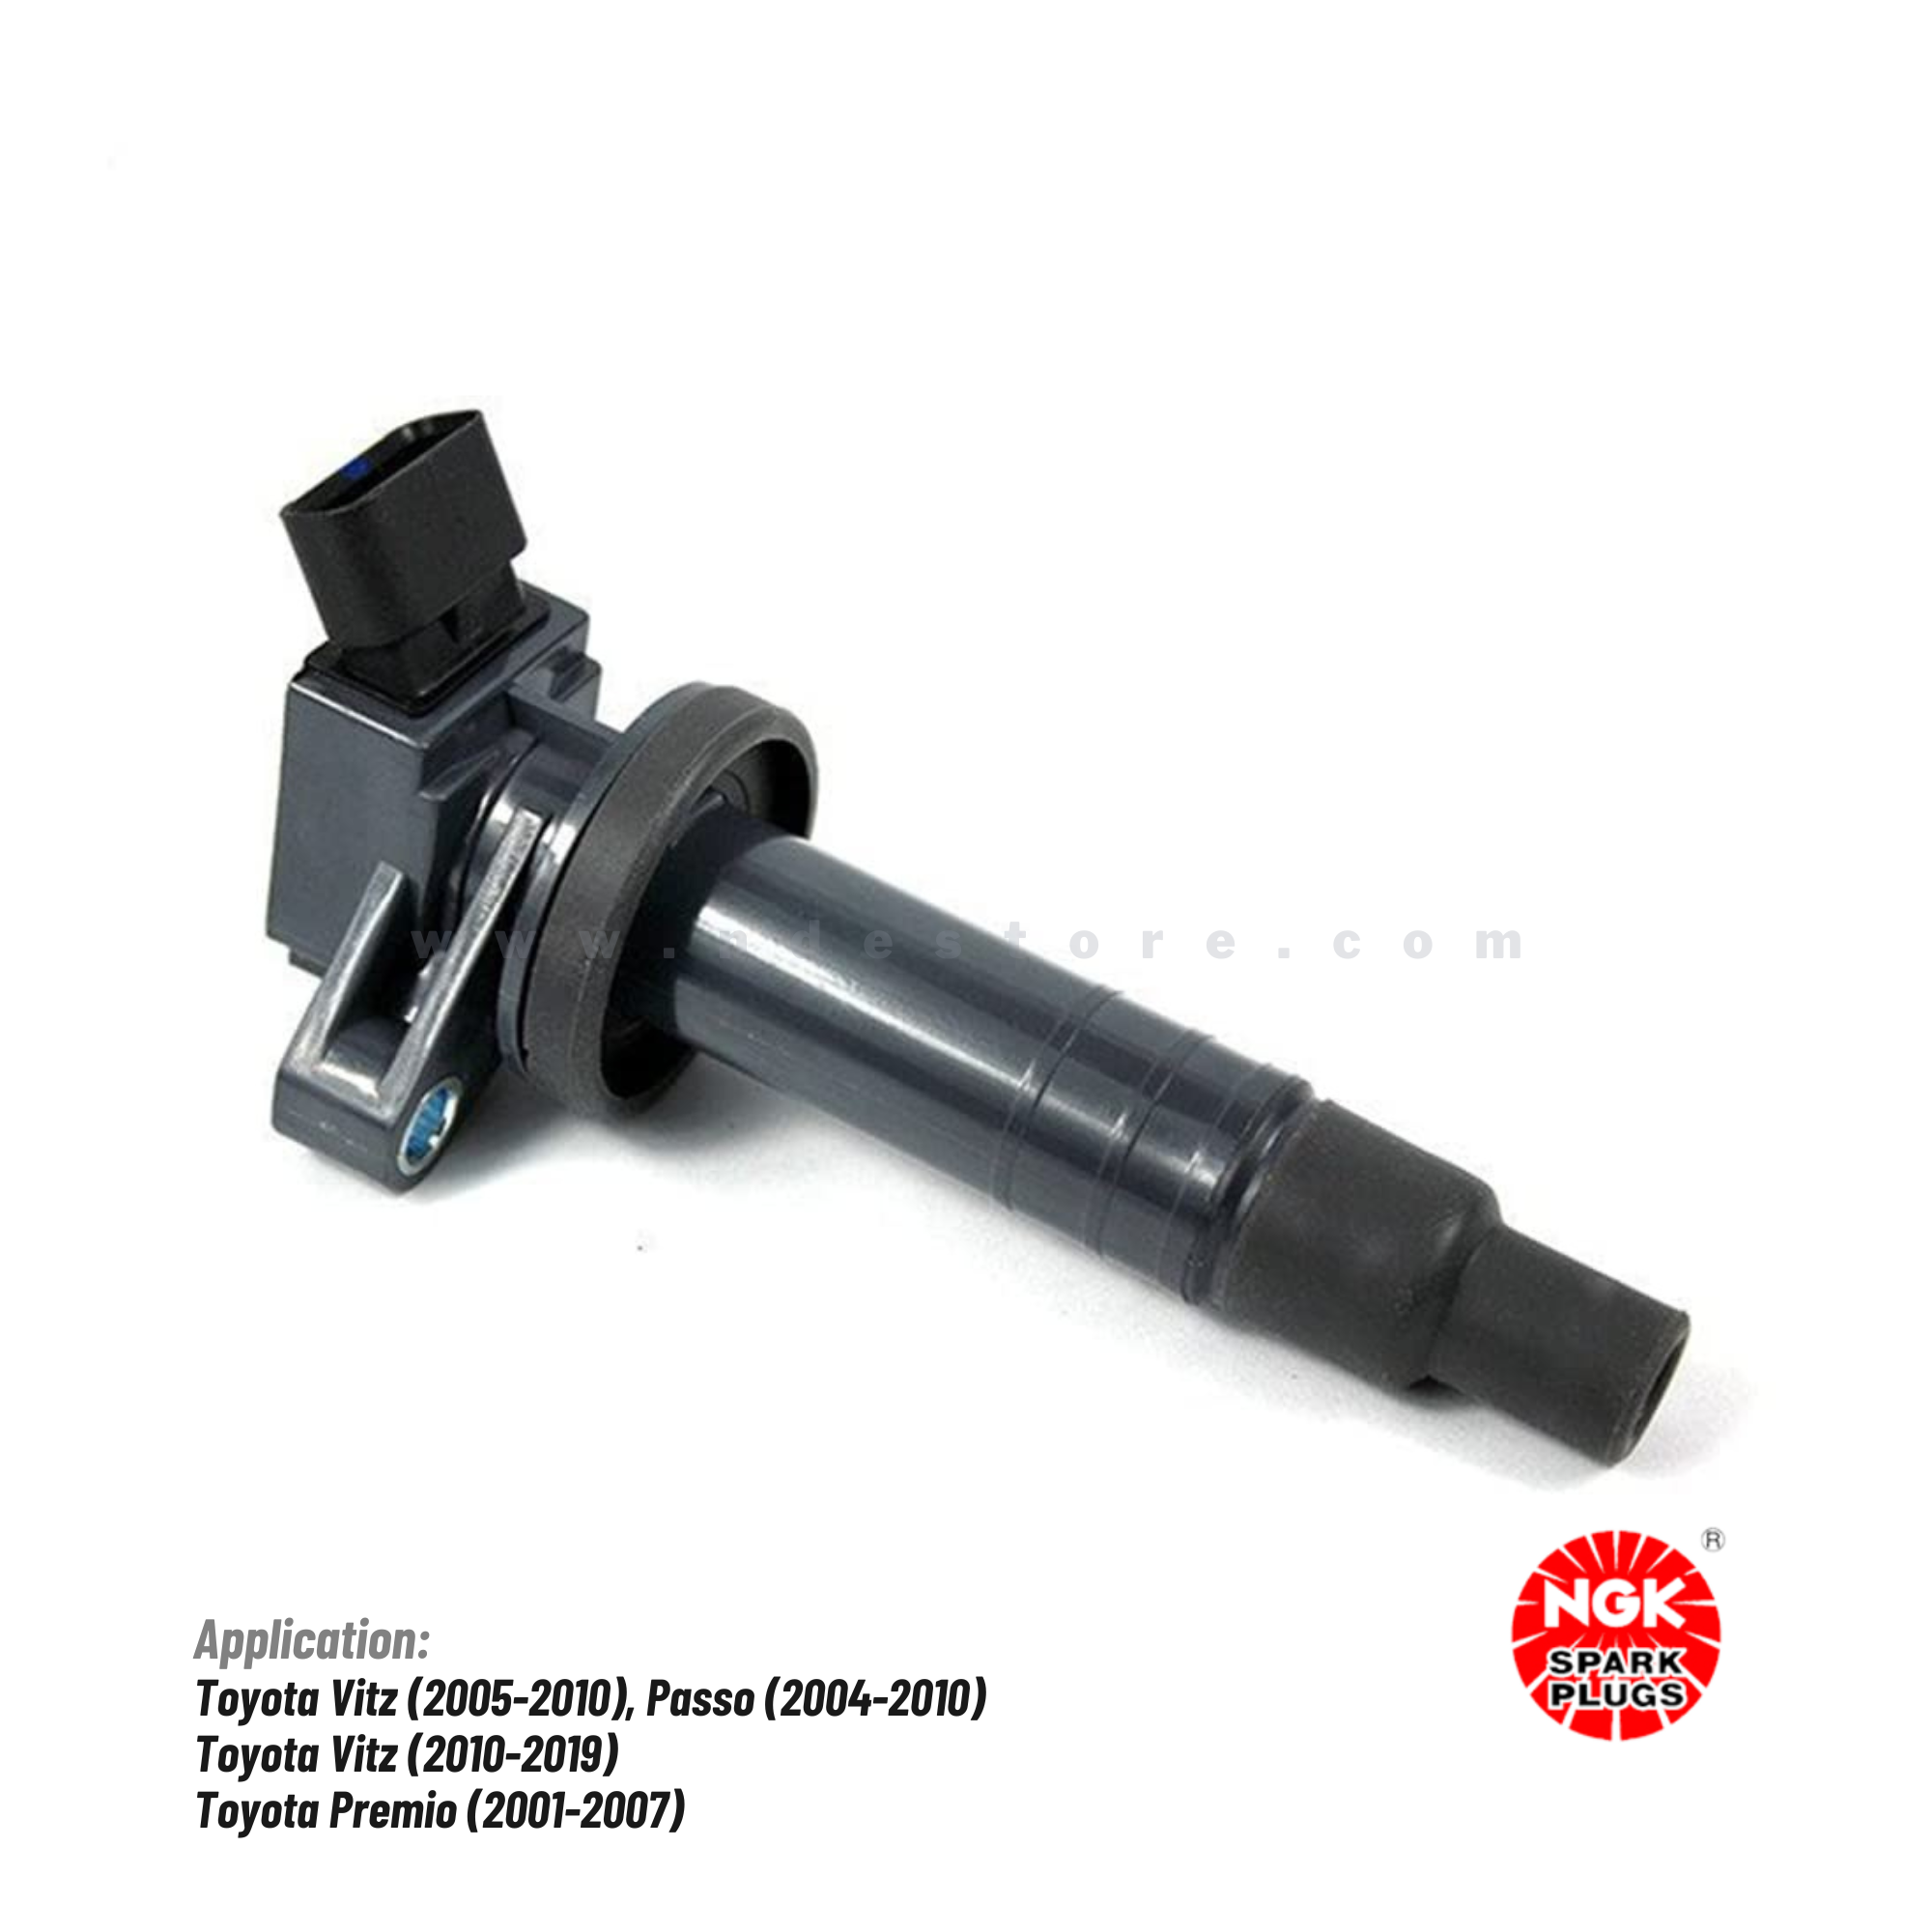 IGNITION COIL NGK FOR TOYOTA PREMIO